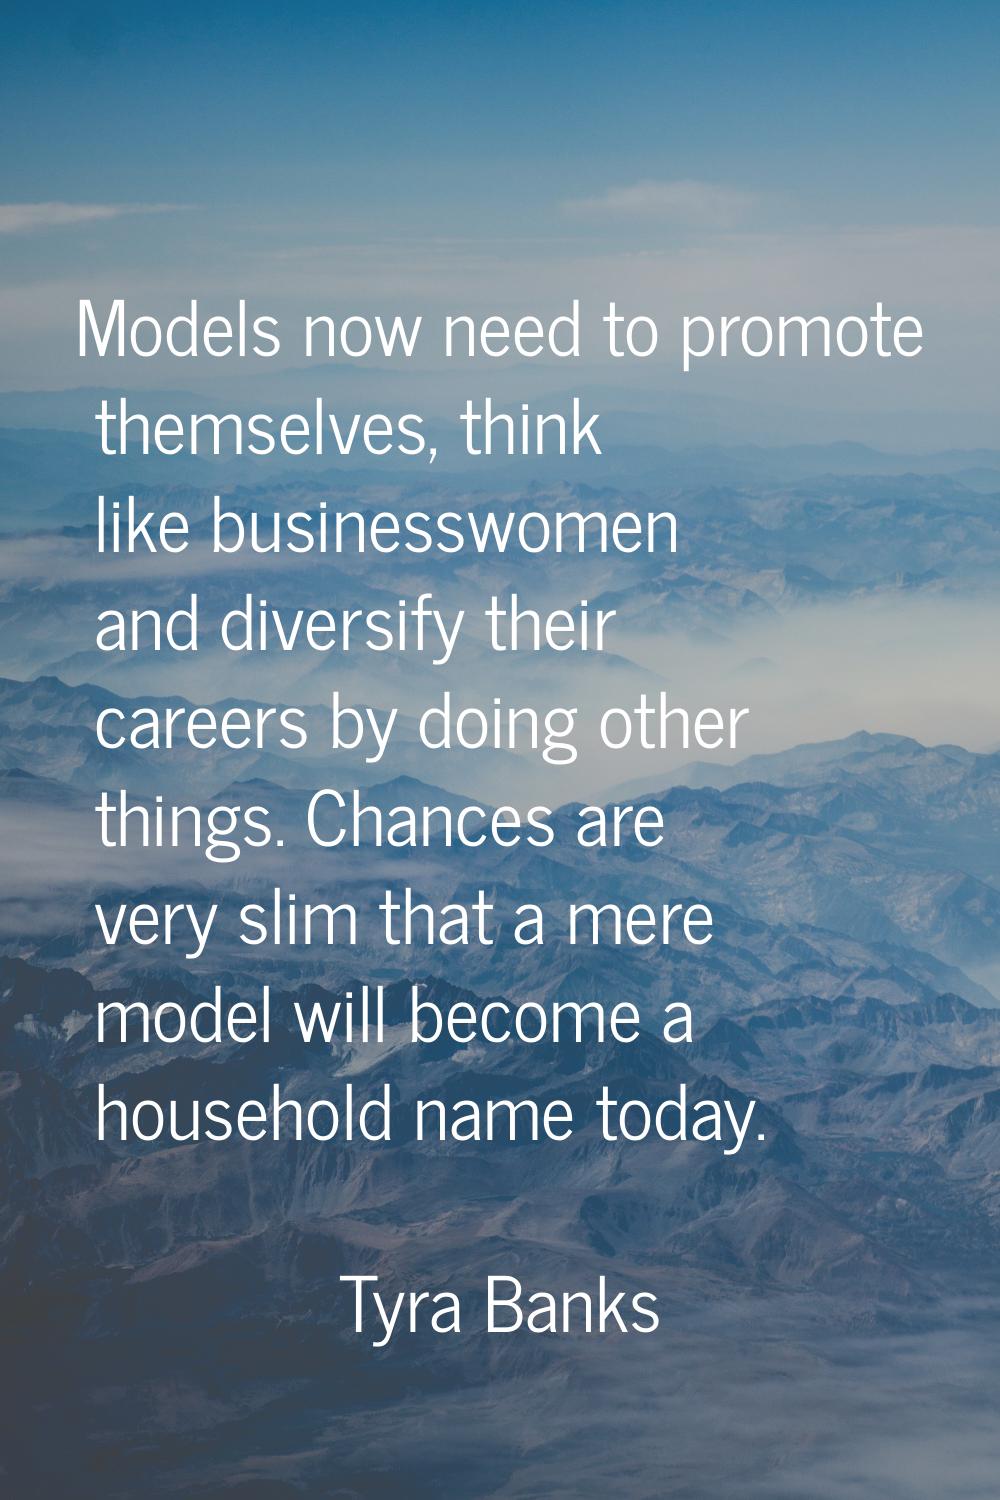 Models now need to promote themselves, think like businesswomen and diversify their careers by doin